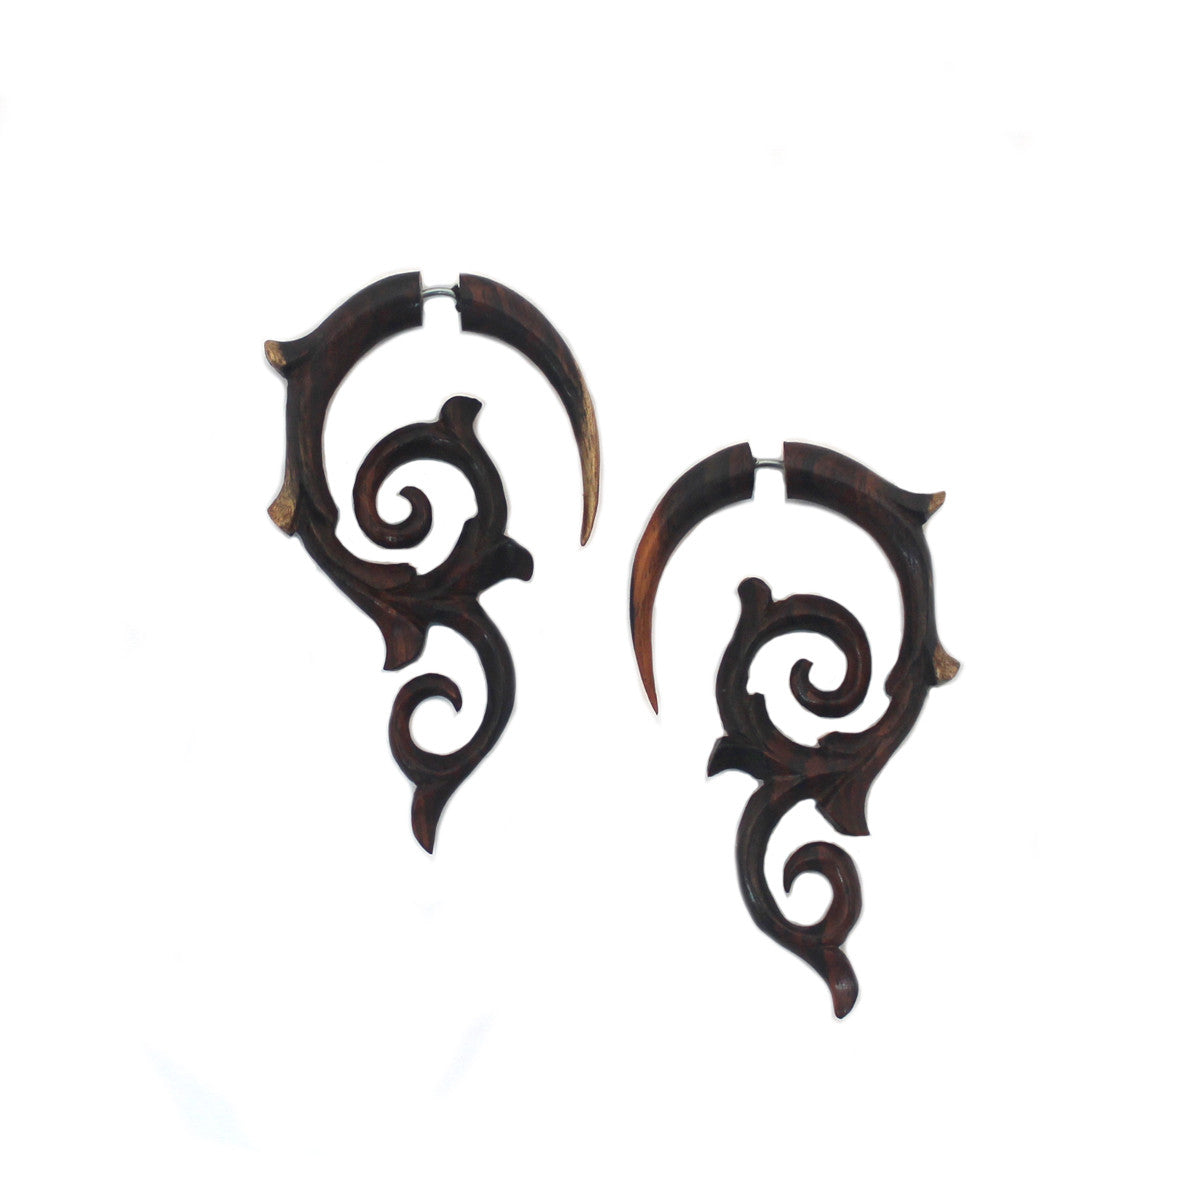 Carved Wood Earrings - Spiral Thorns